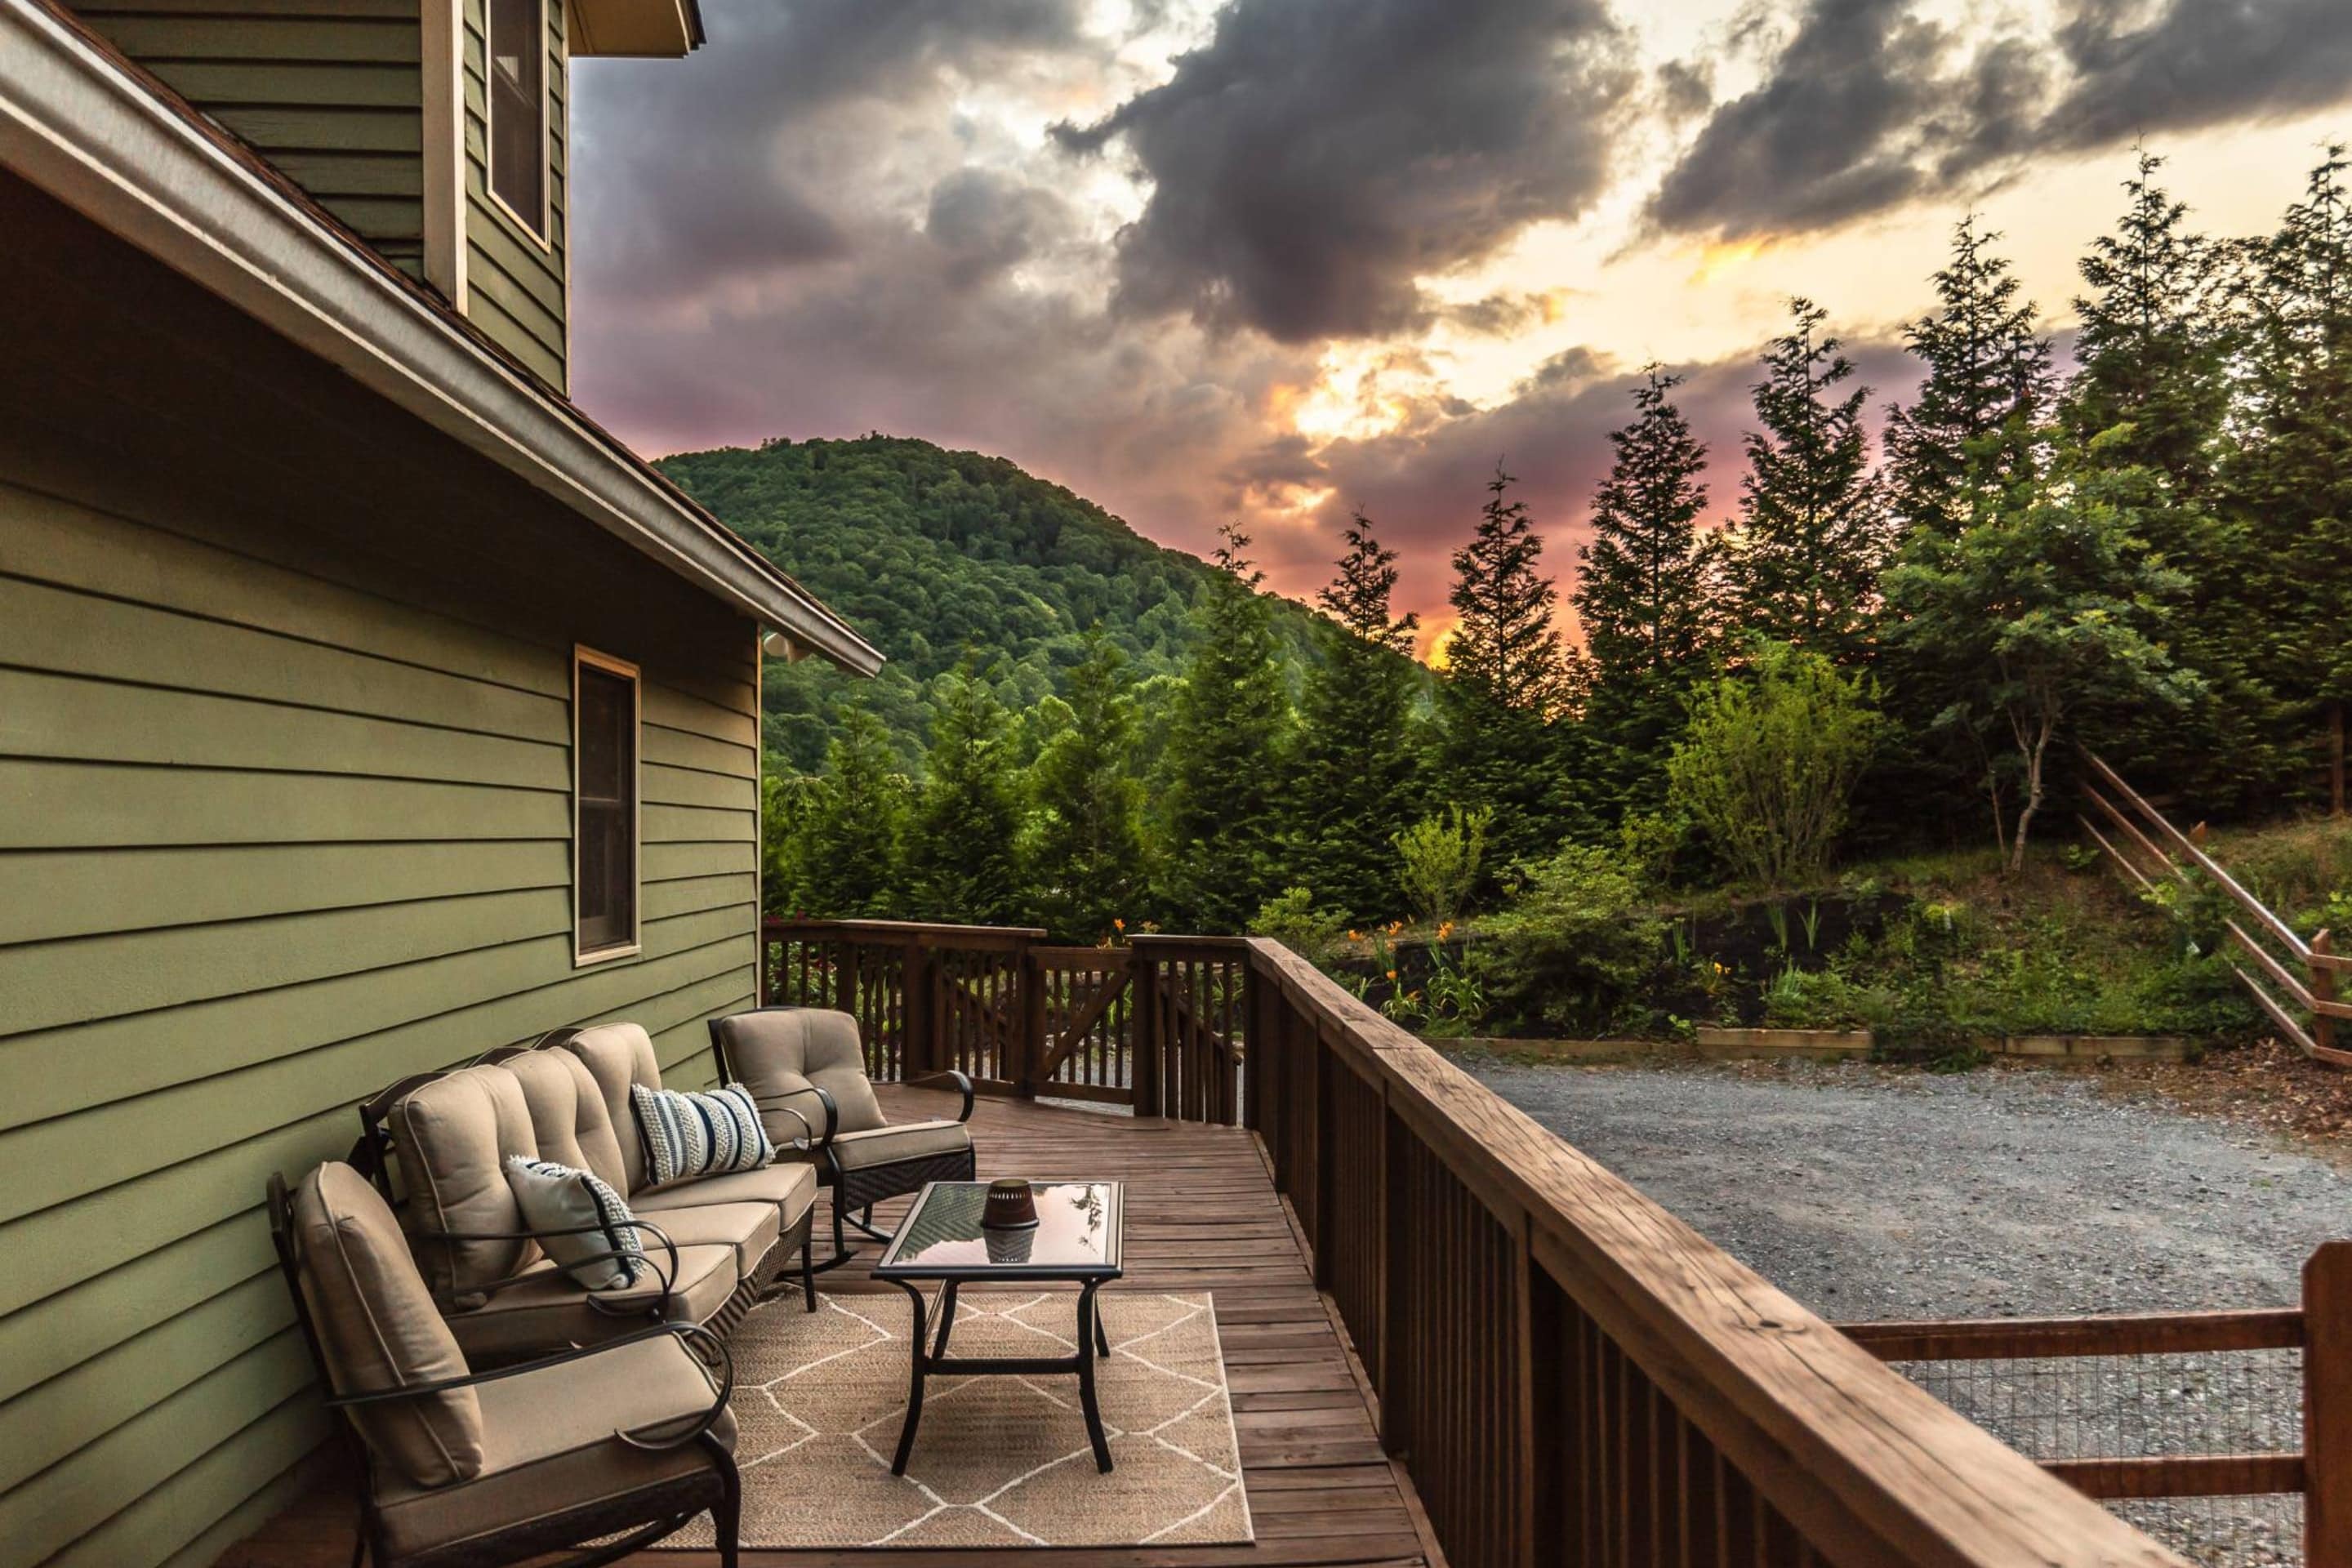 A mesmerizing sunset view from your deck. 